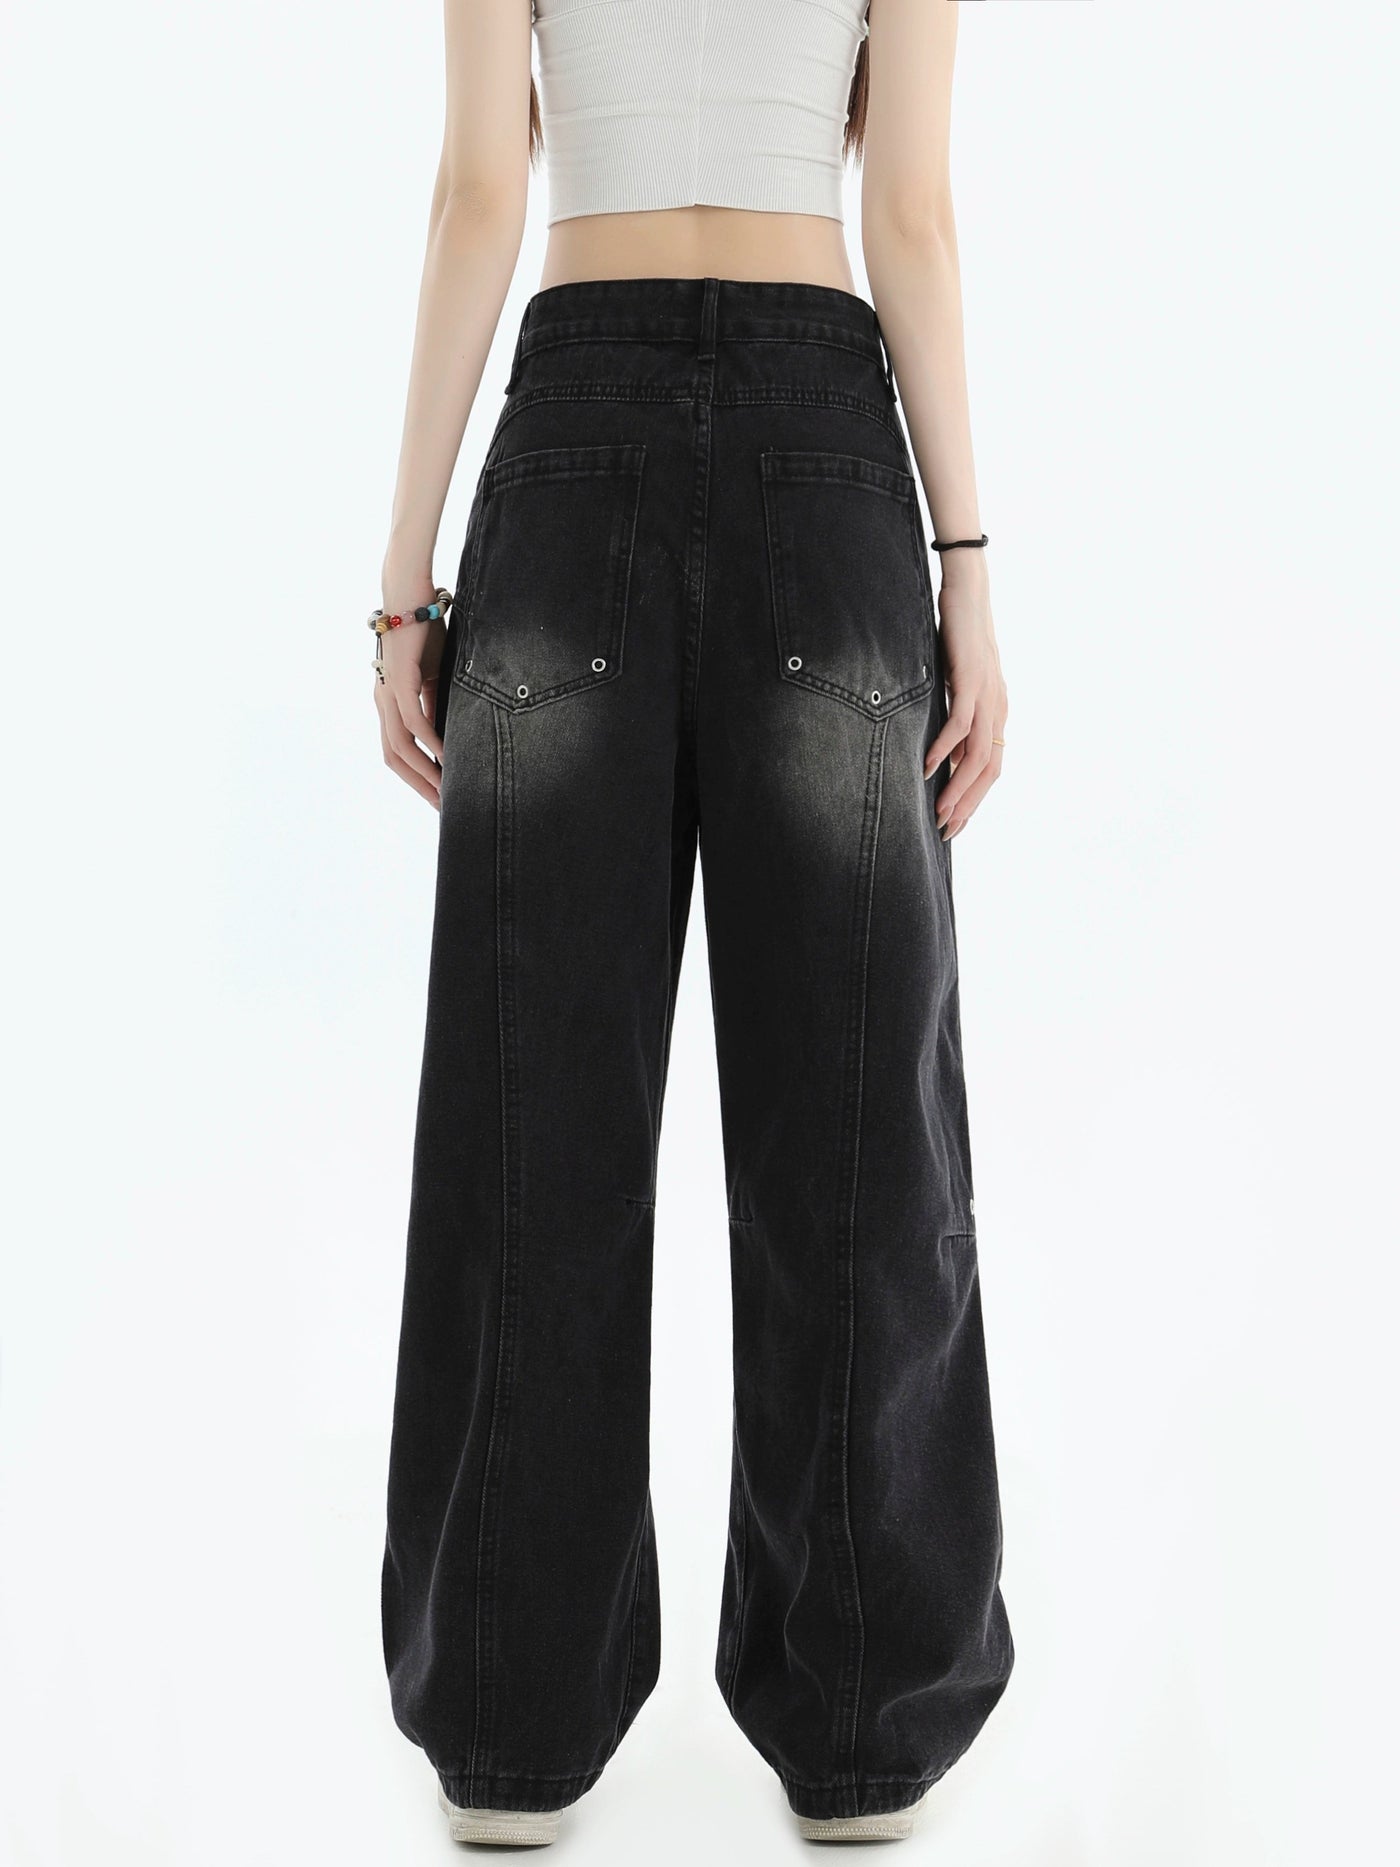 Whiskers and Faded Casual Jeans Korean Street Fashion Jeans By INS Korea Shop Online at OH Vault